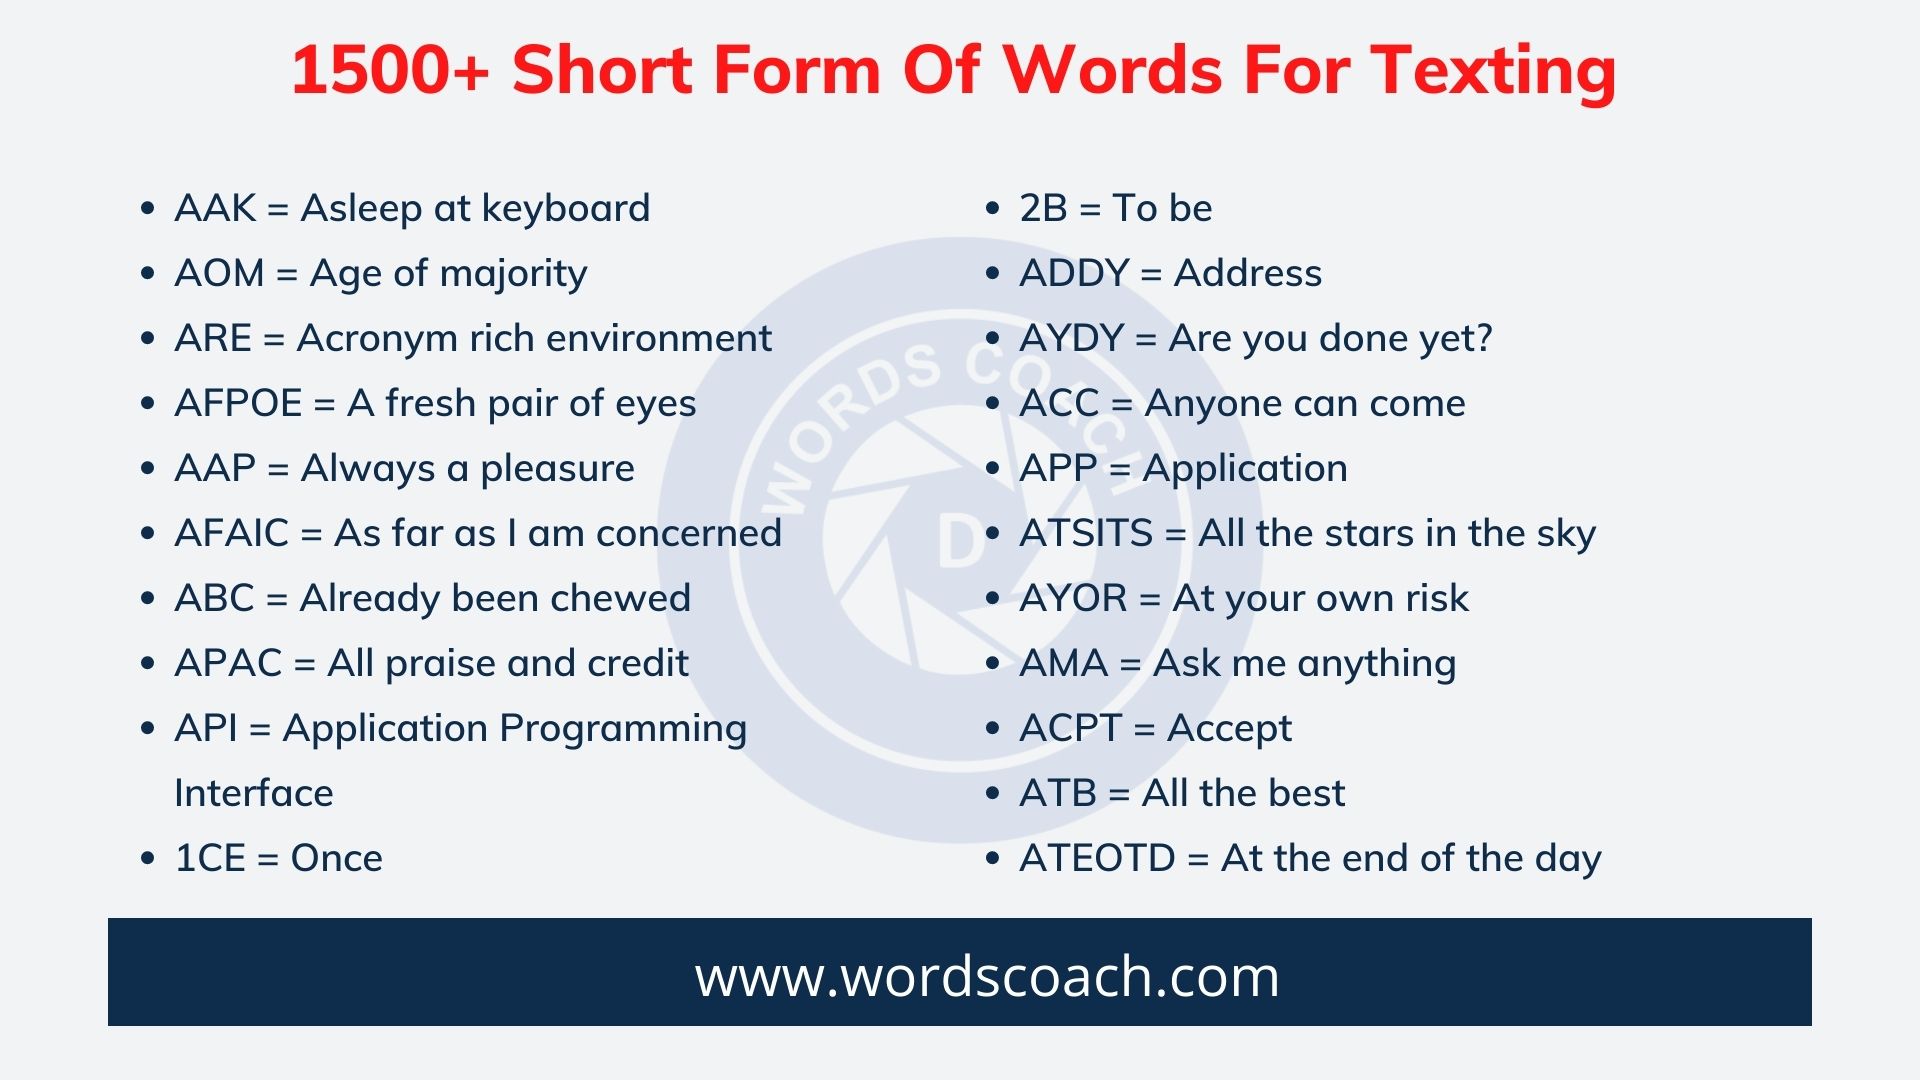 1500+ Short Form Of Words For Texting - Word Coach